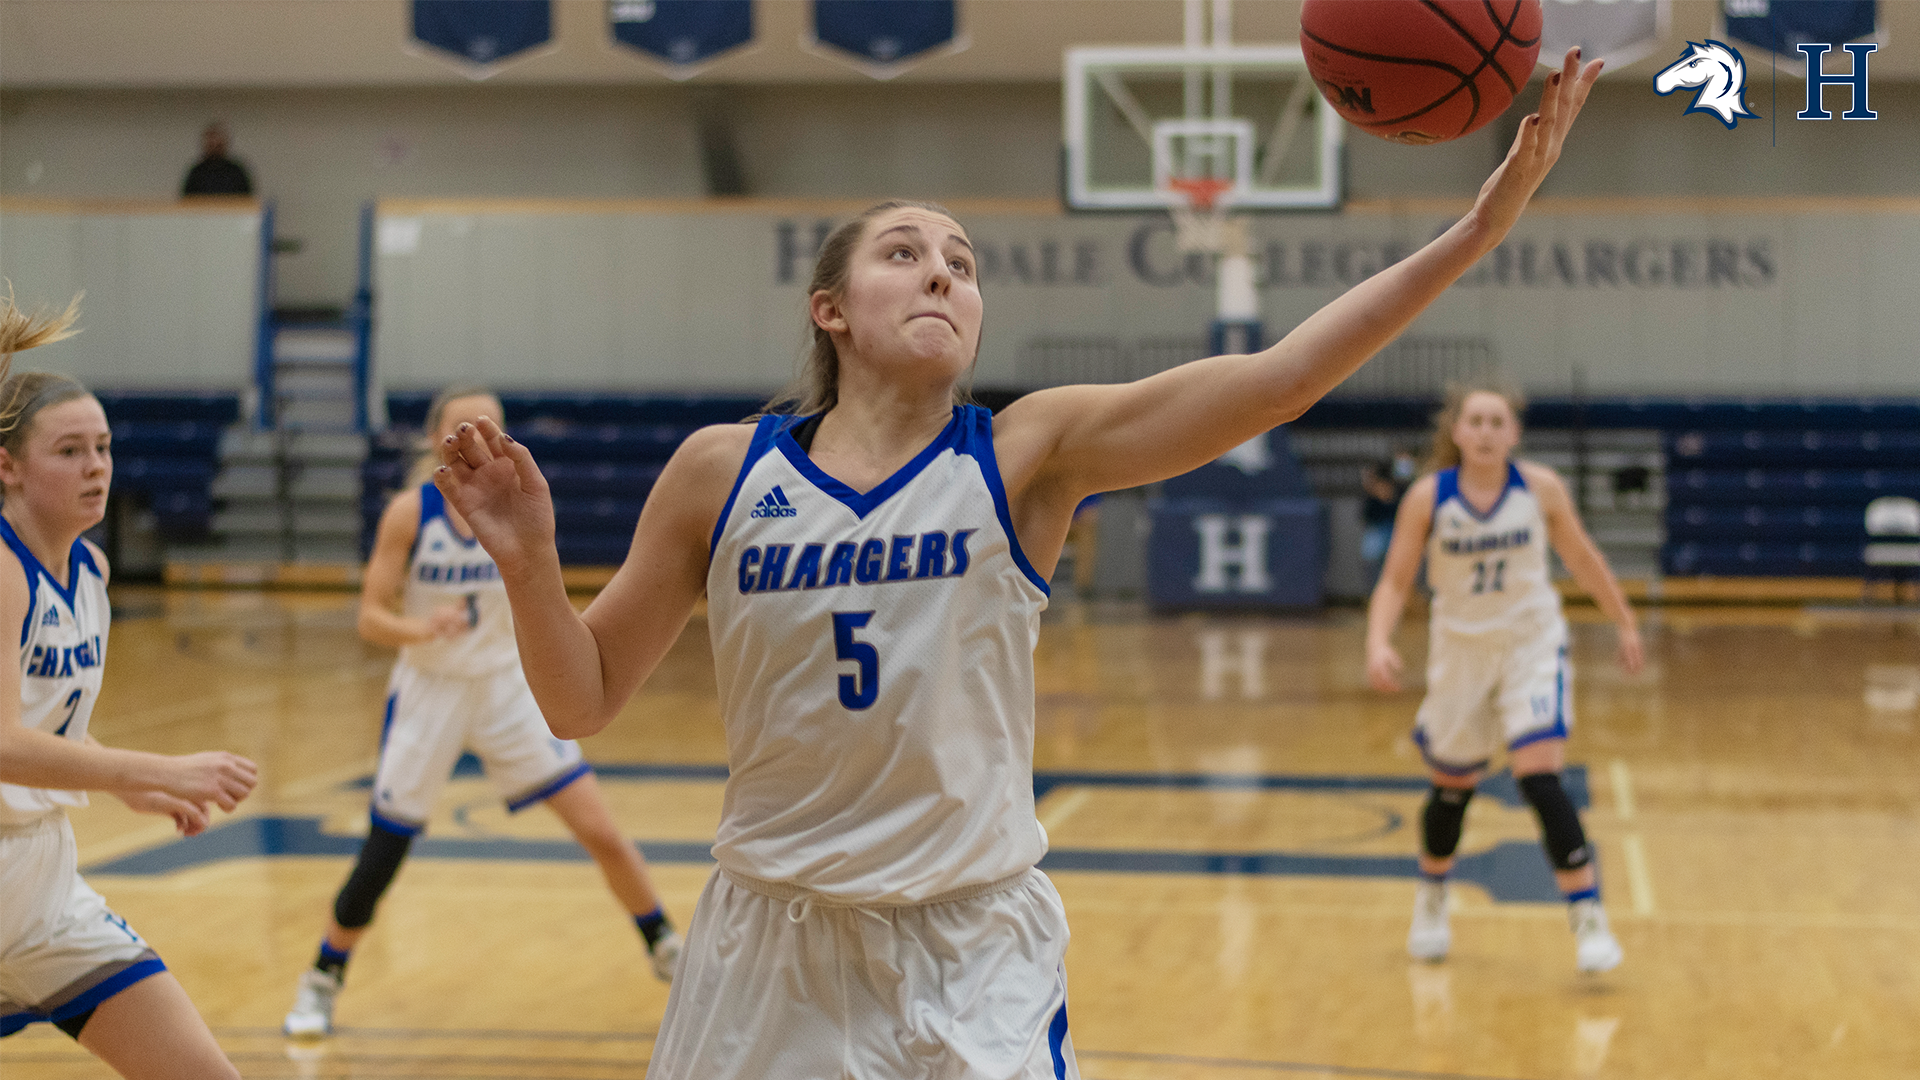 Charger women cool off late in 78-64 road loss to Malone